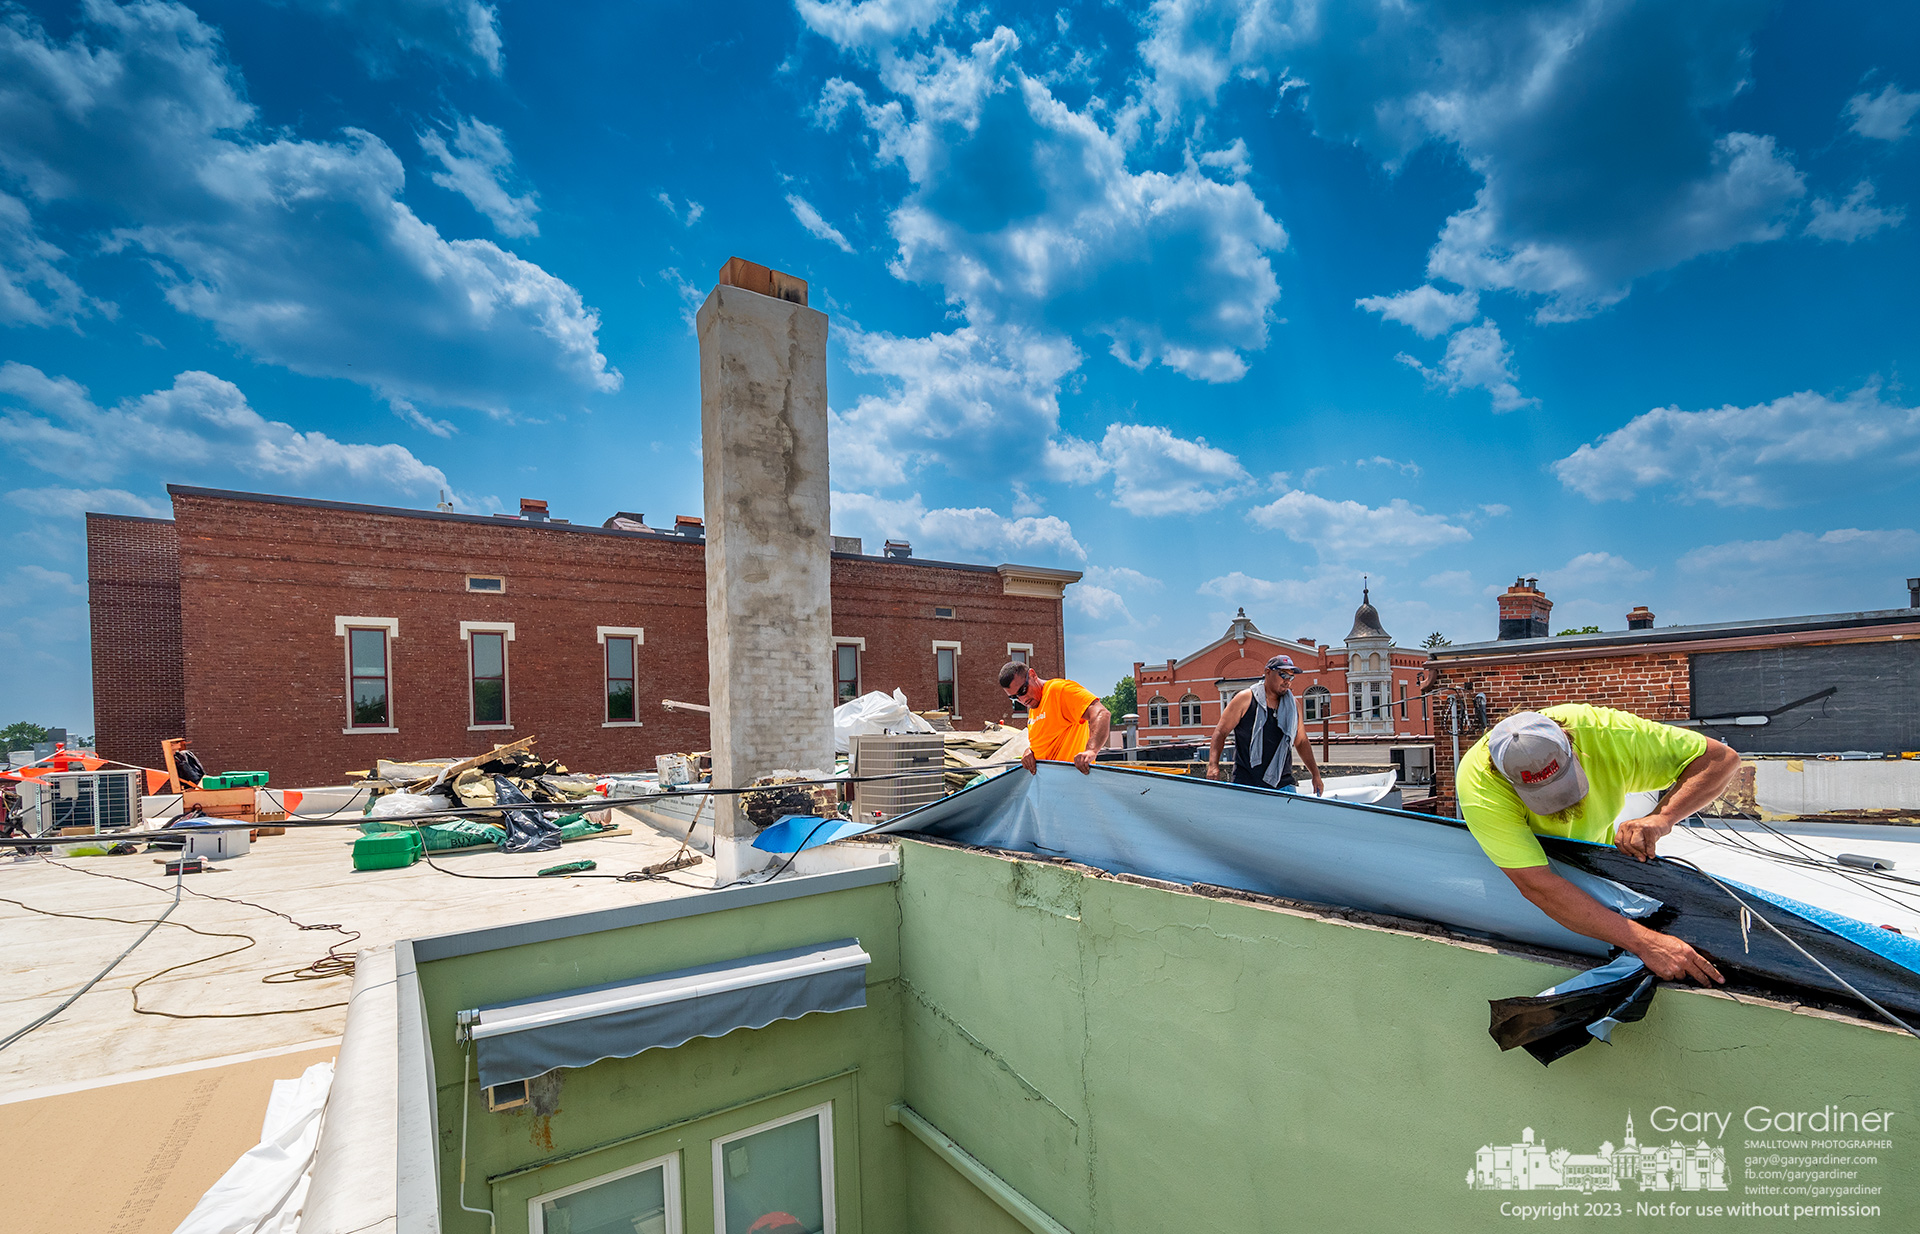 Workers replace the roof bladder on the top of the building on East College that houses Cardinal Pizza and Grandfather Clock Company. Across the streets are Old Bag o' Nails and the Holmes Hotel. My Final Photo for June 9, 2023.